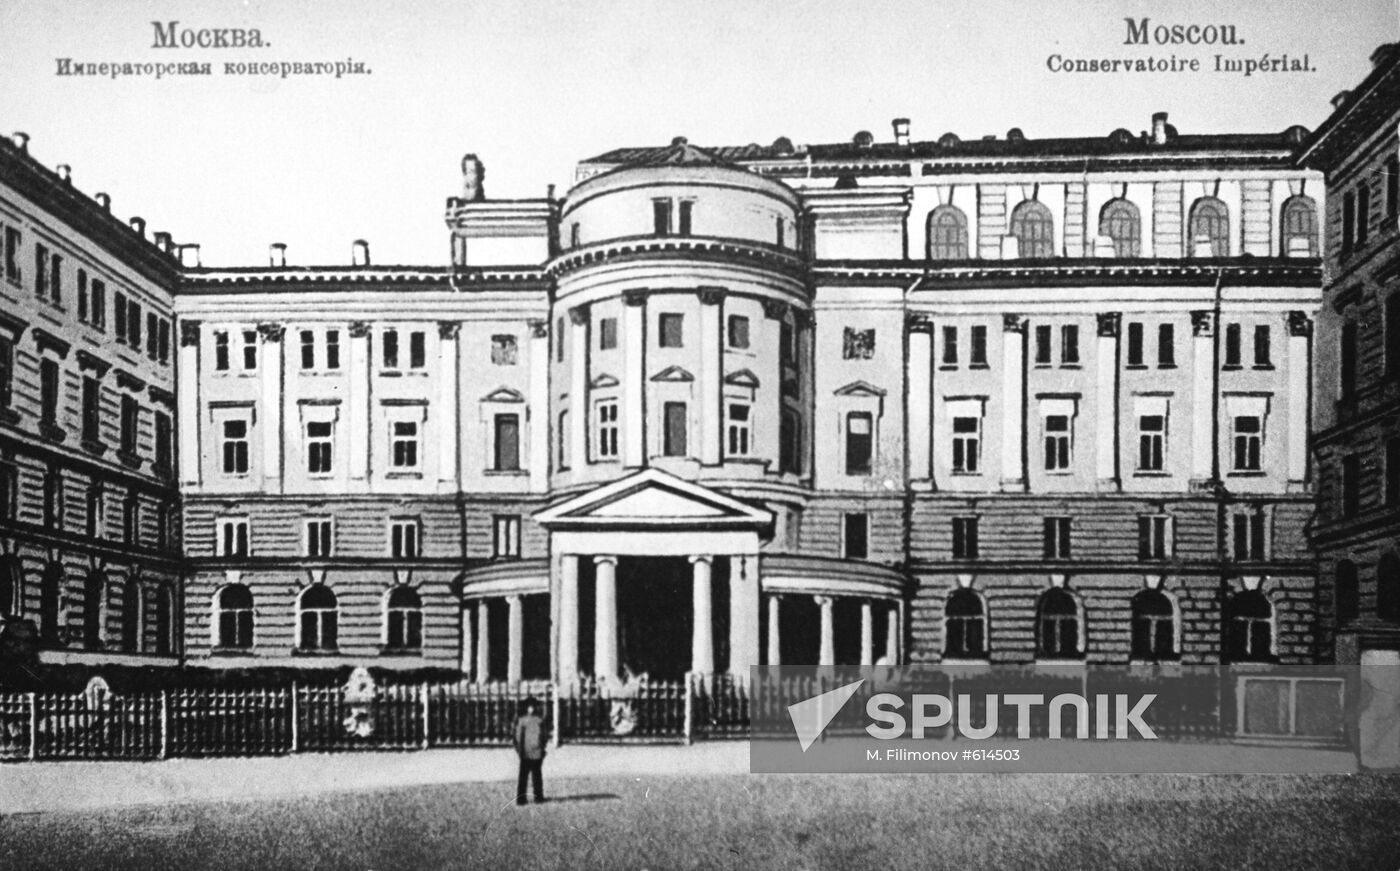 Moscow. Imperial Conservatory photo. Reproduction